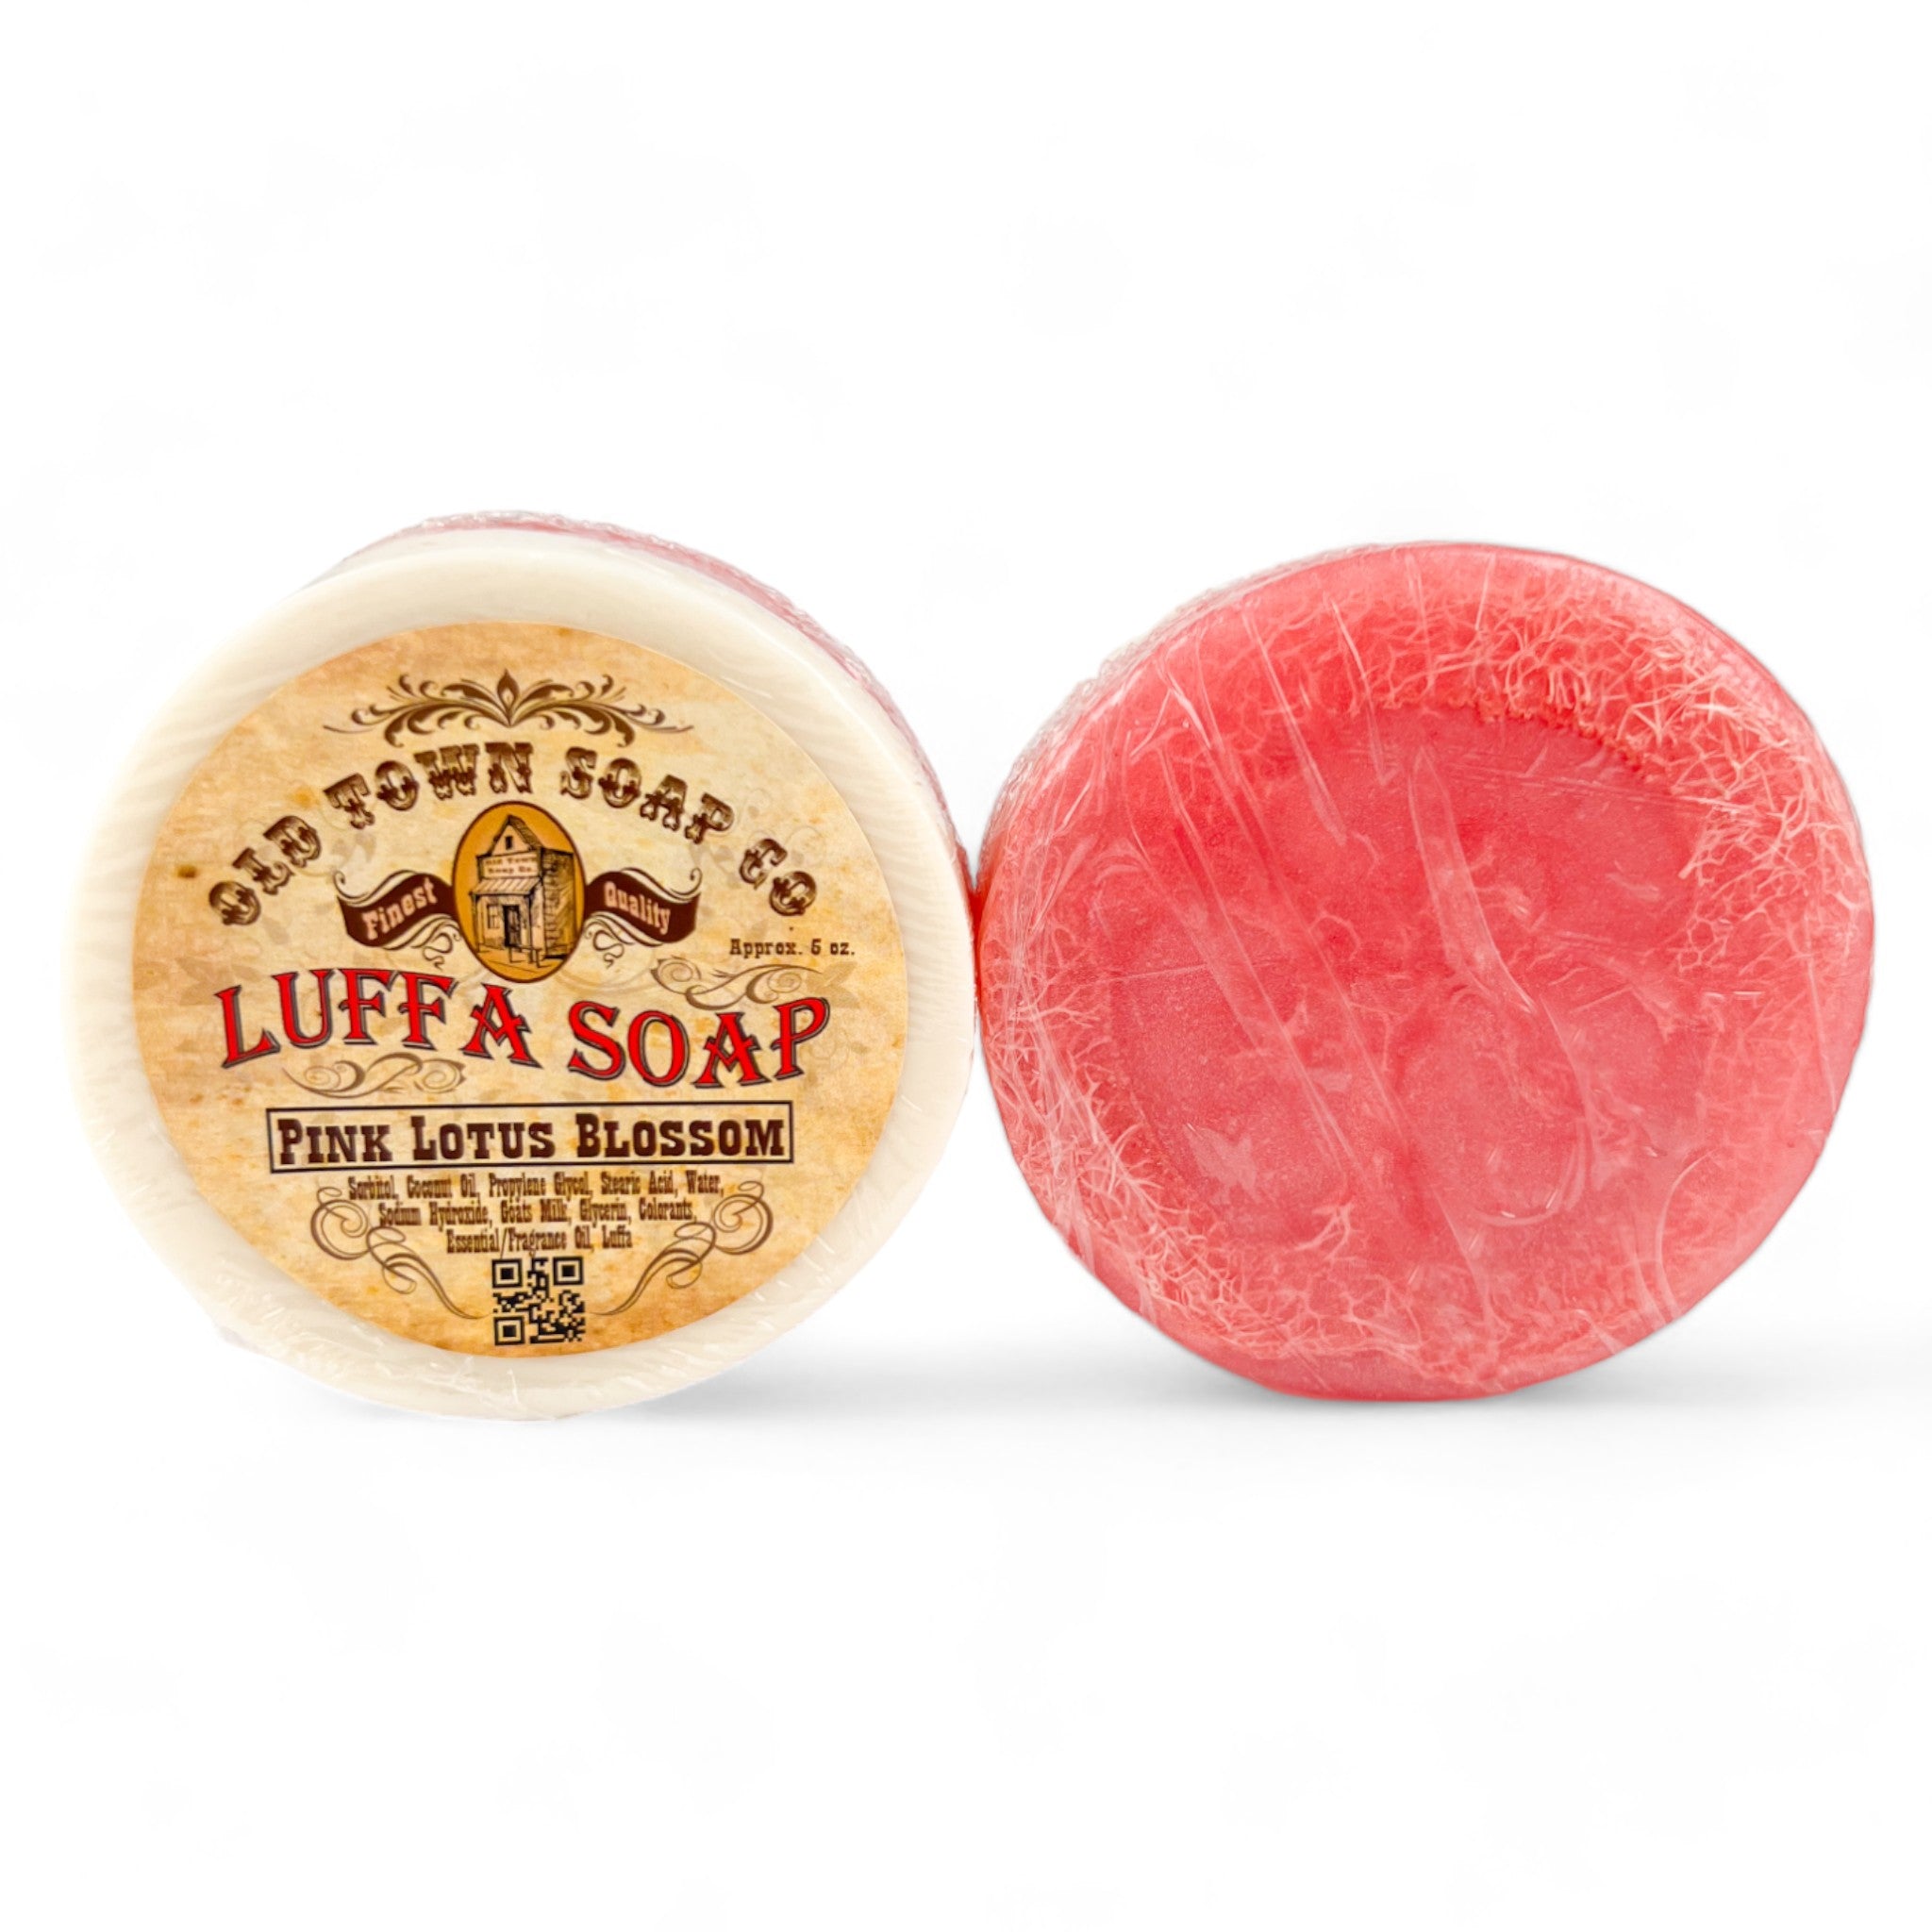 Pink Lotus Blossom -Luffa Soap - Old Town Soap Co.